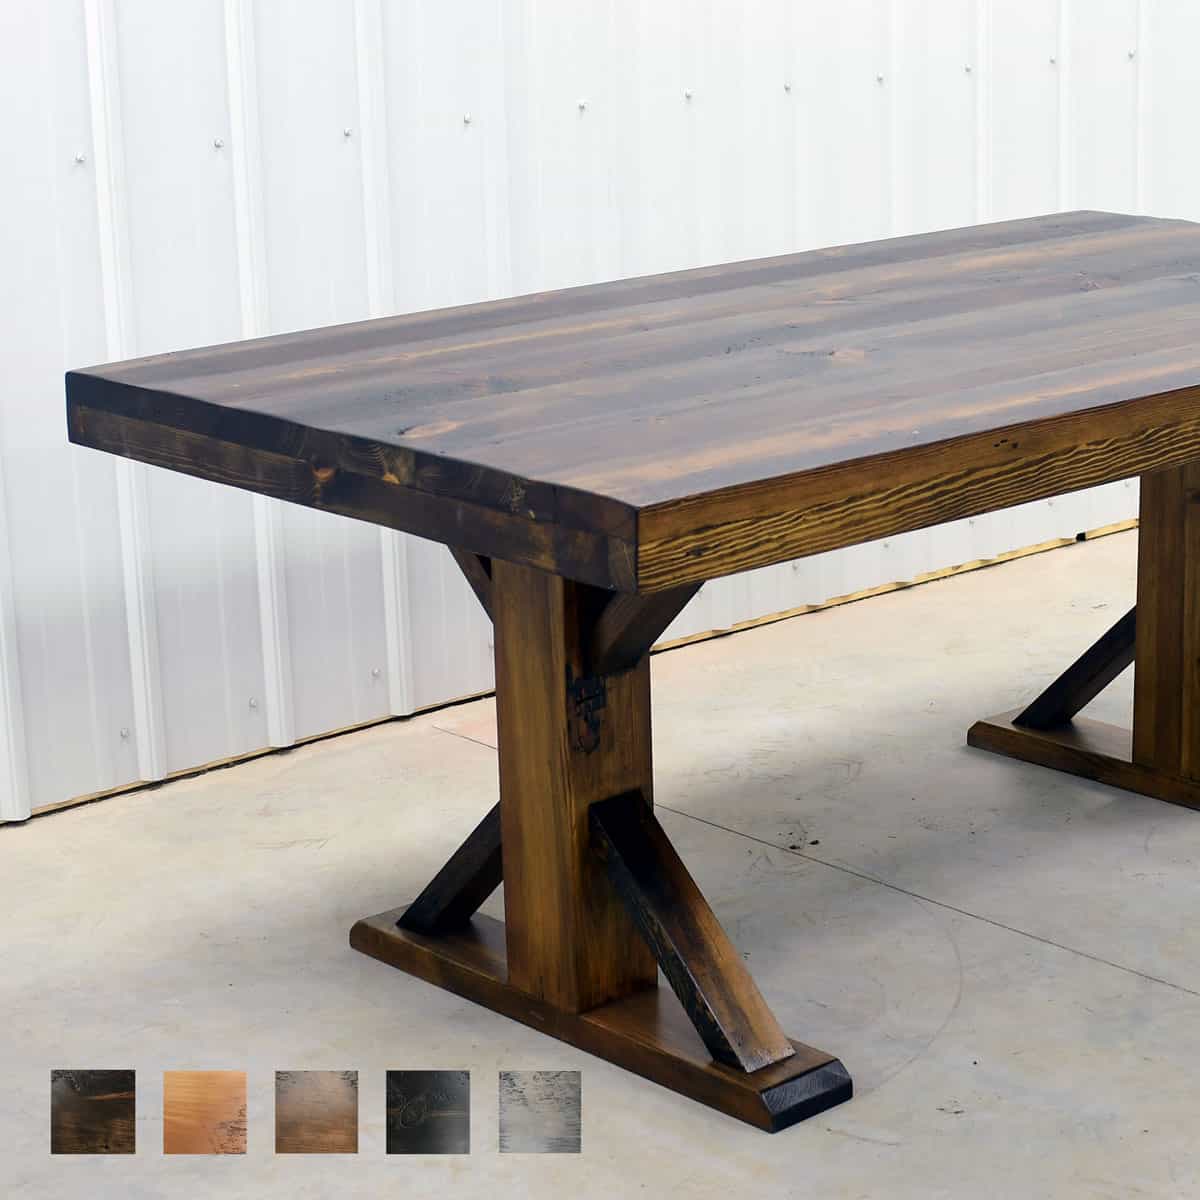 Made to Order Table Tops, Bespoke Table Tops, Solid Wood Table Tops